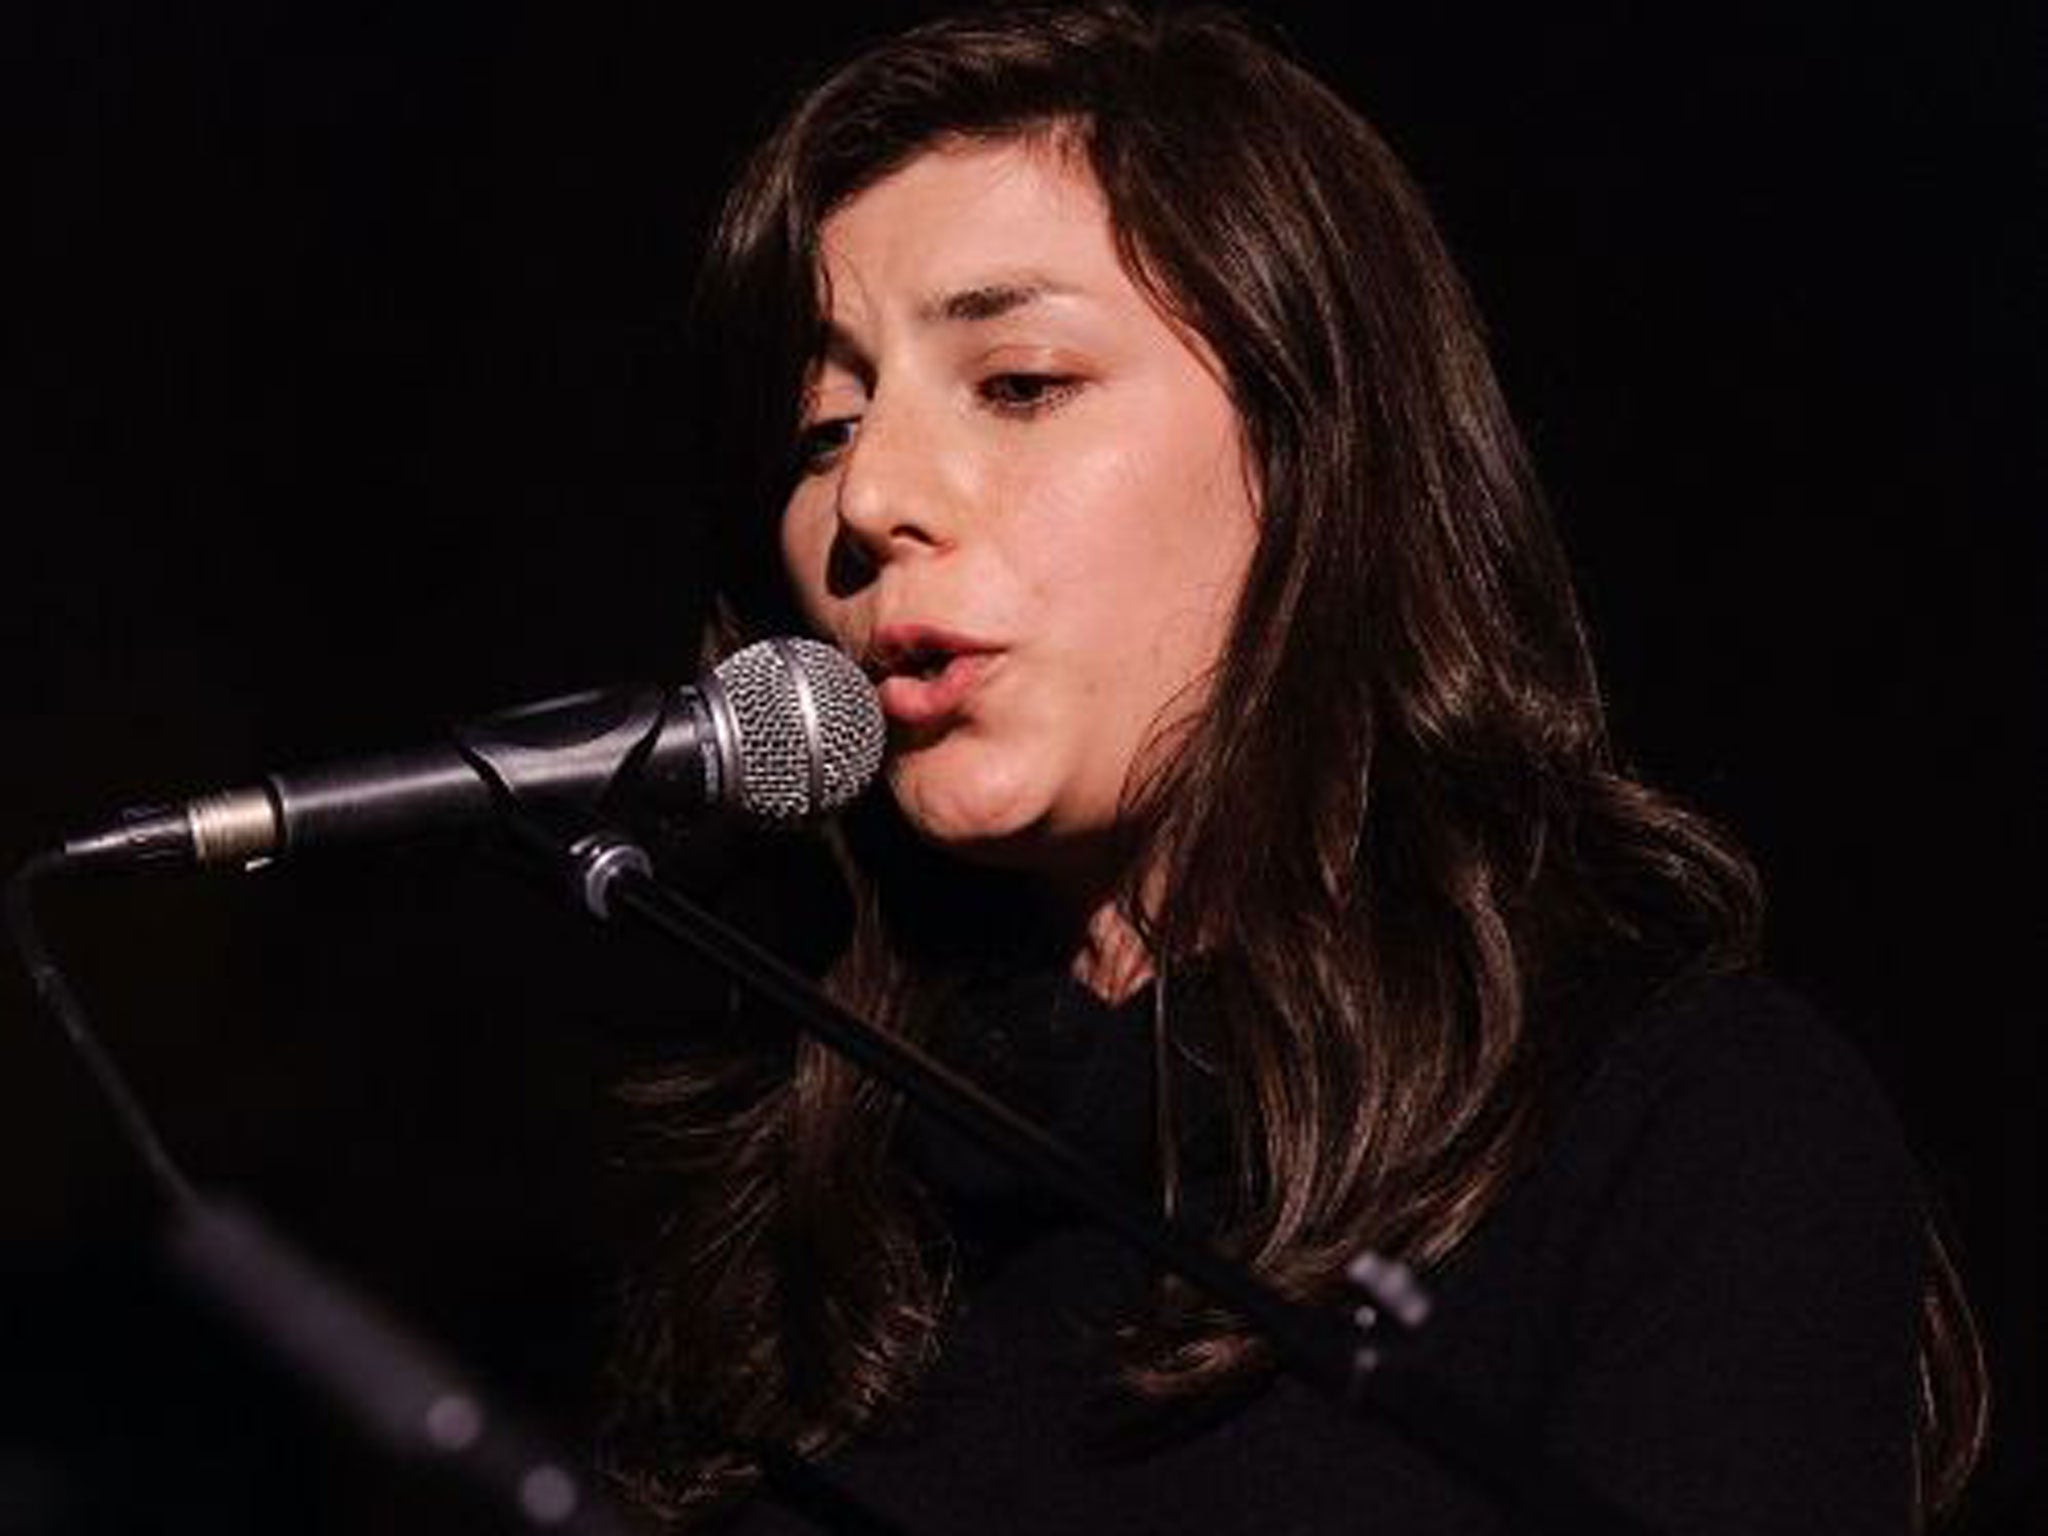 Julia Holter: 'My mom can't play trumpet but I'd want her on it'